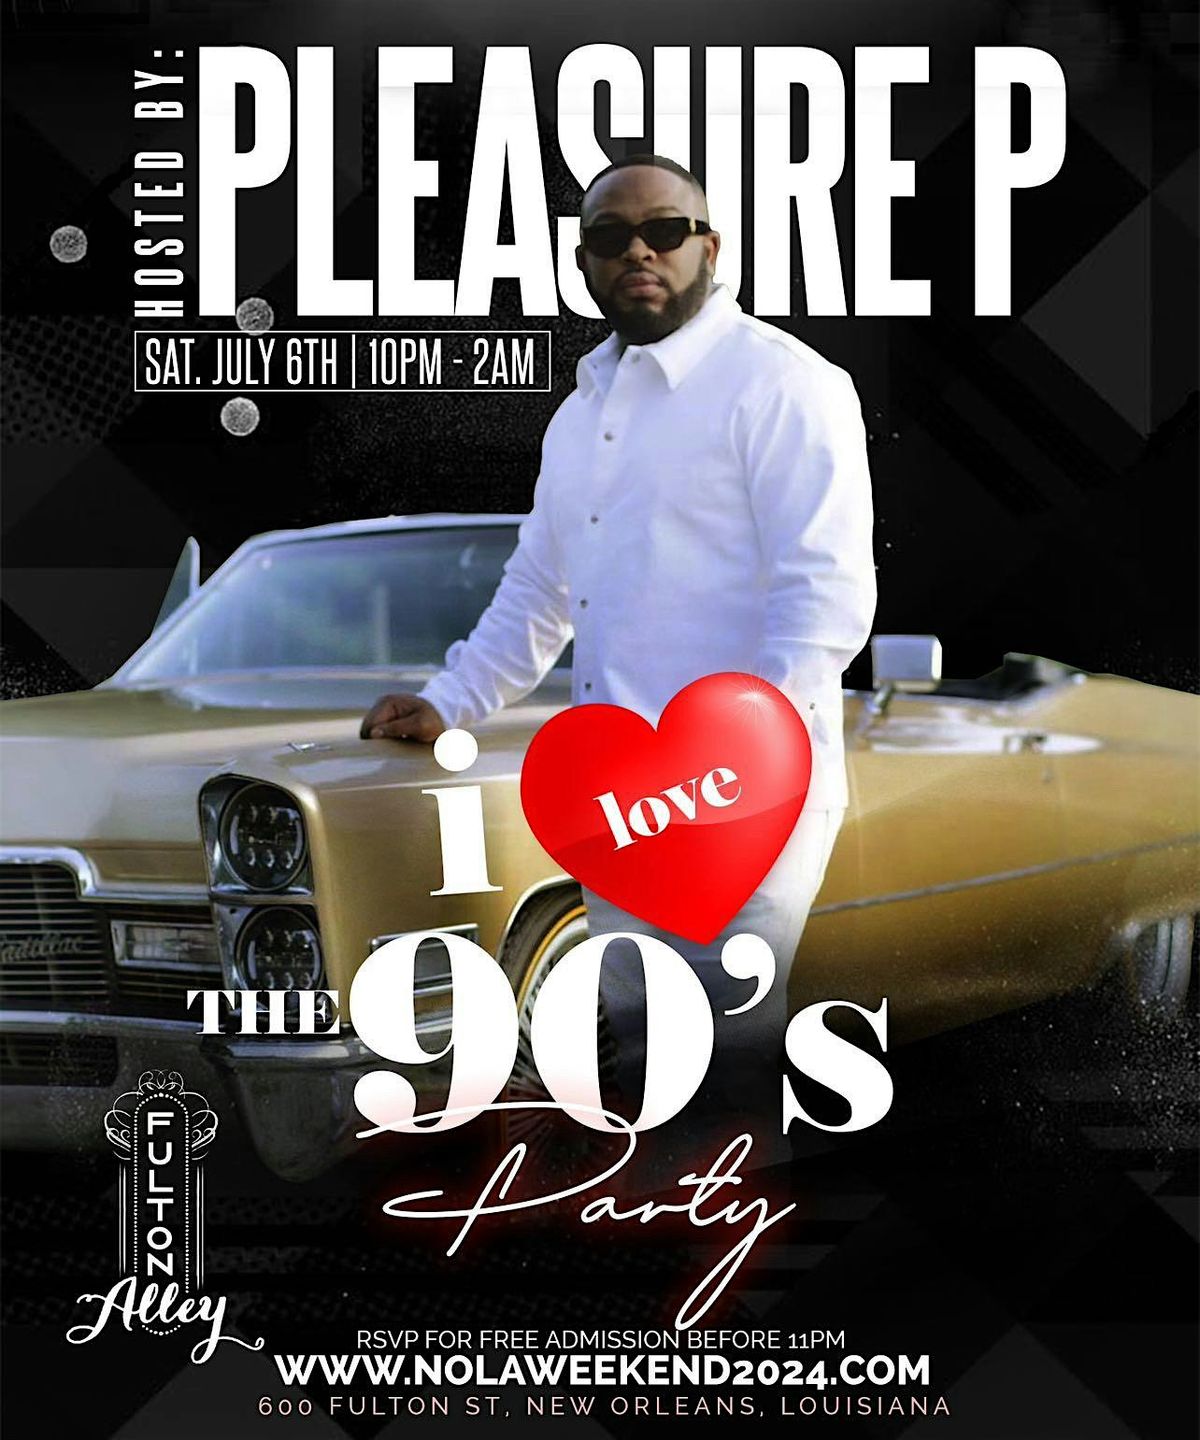 I LOVE THE 90'S NOLA FESTIVAL WEEKEND with Pleasure P